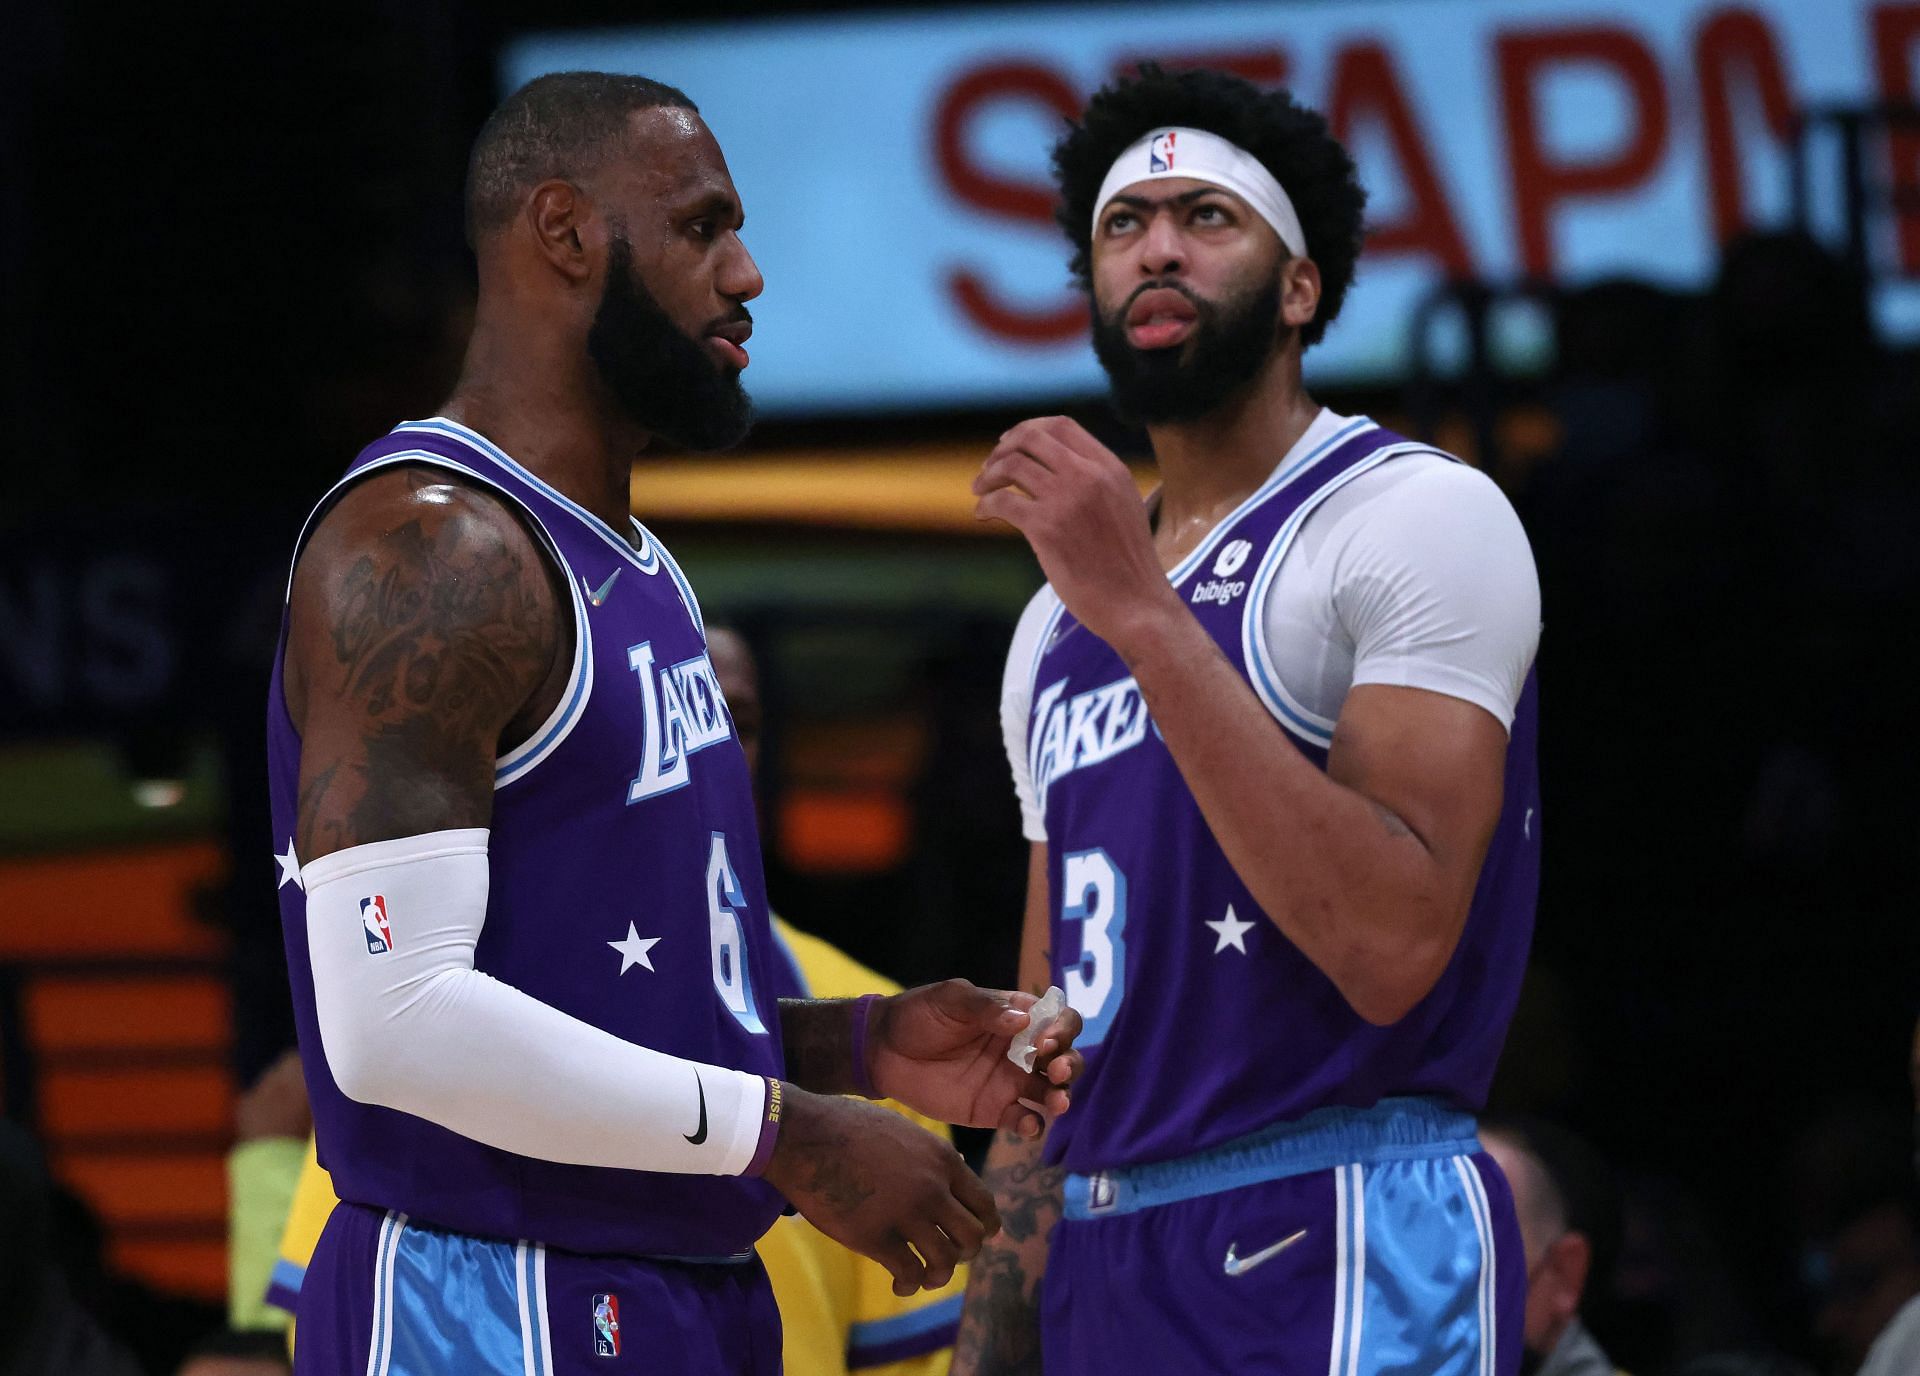 LeBron James #6 and Anthony Davis #3 of the Los Angeles Lakers react during a 119-115 Clippers win over the Los Angeles Lakers at Staples Center on December 03, 2021 in Los Angeles, California.